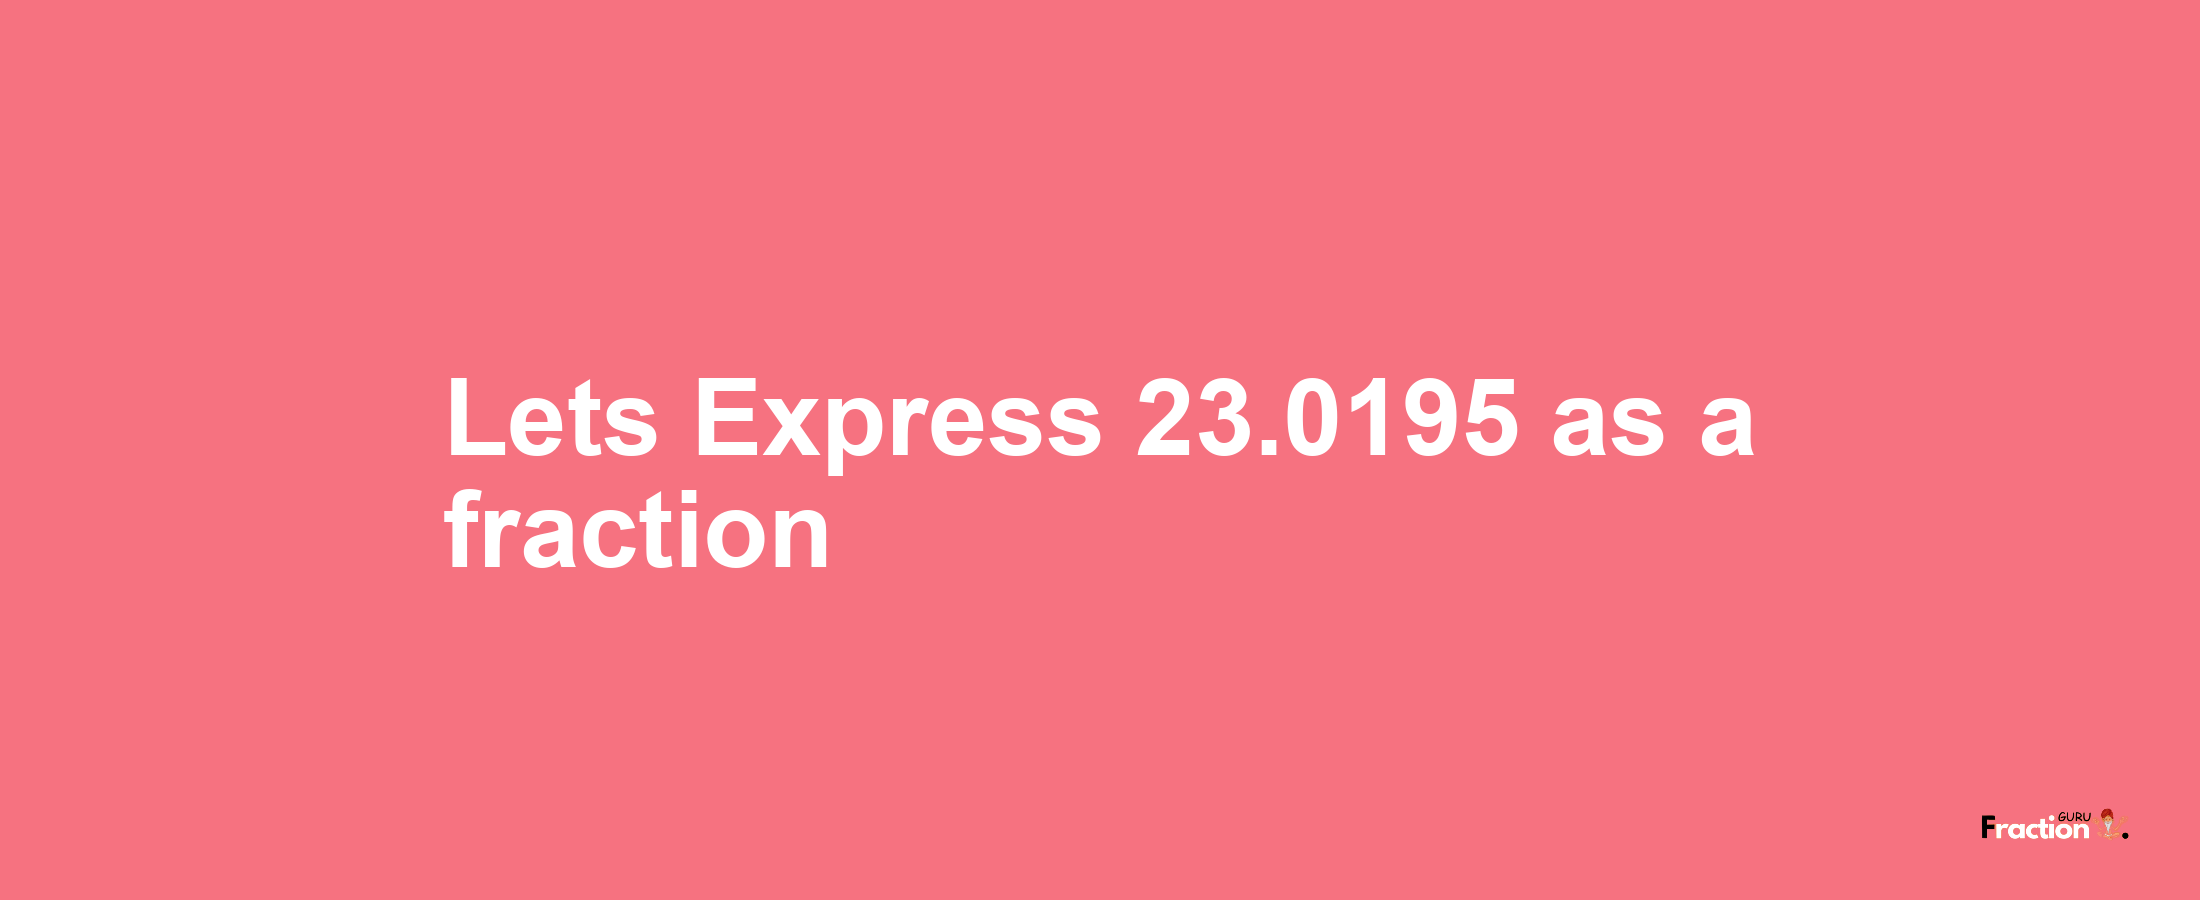 Lets Express 23.0195 as afraction